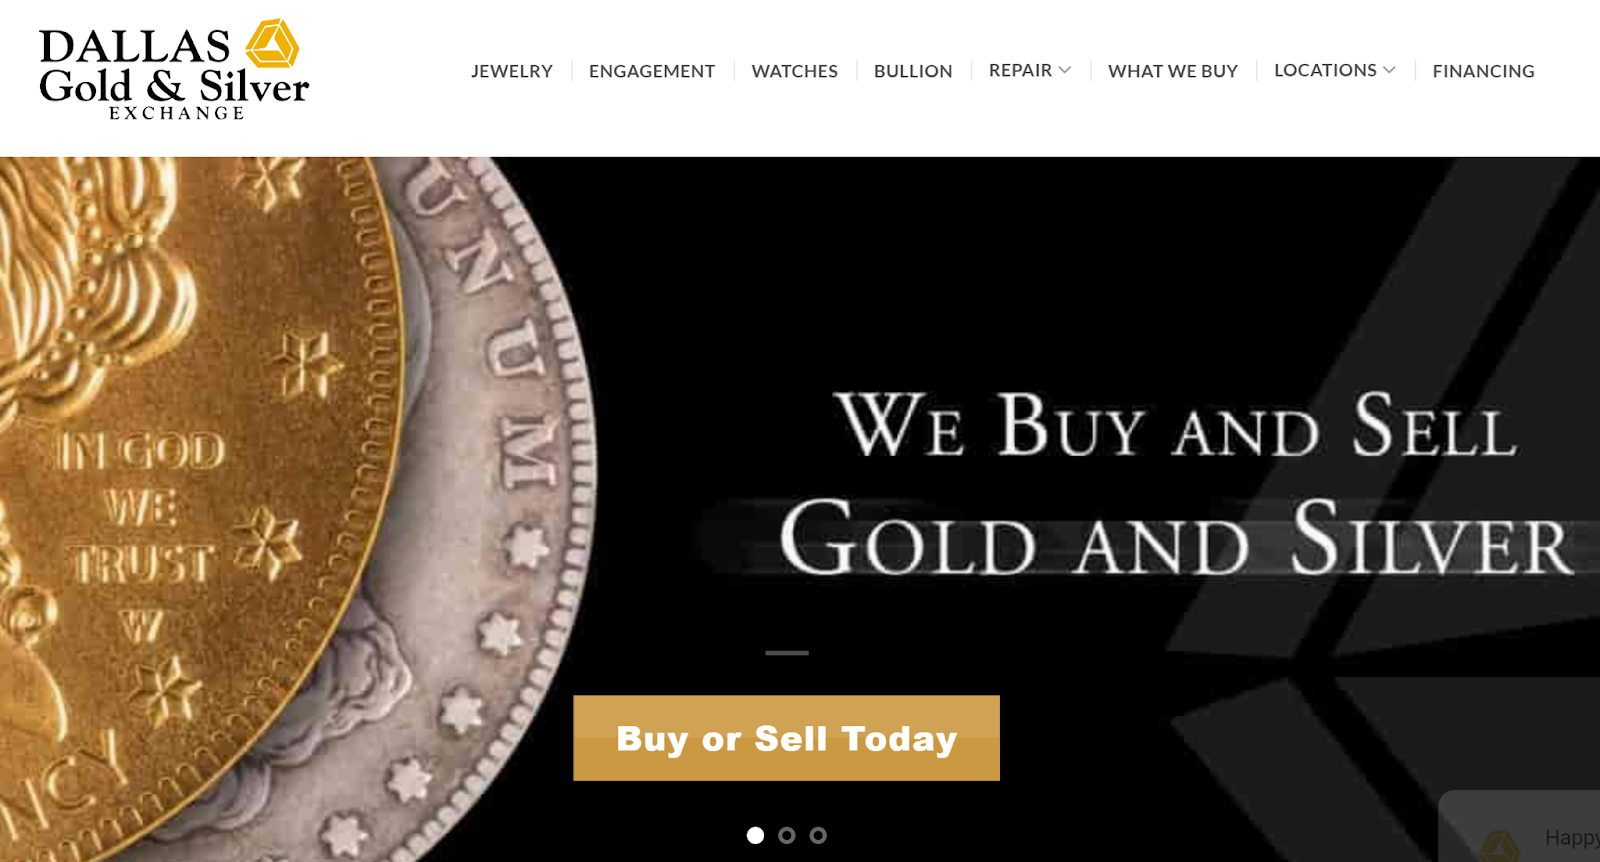 Dallas Gold and Silver Exchange website 